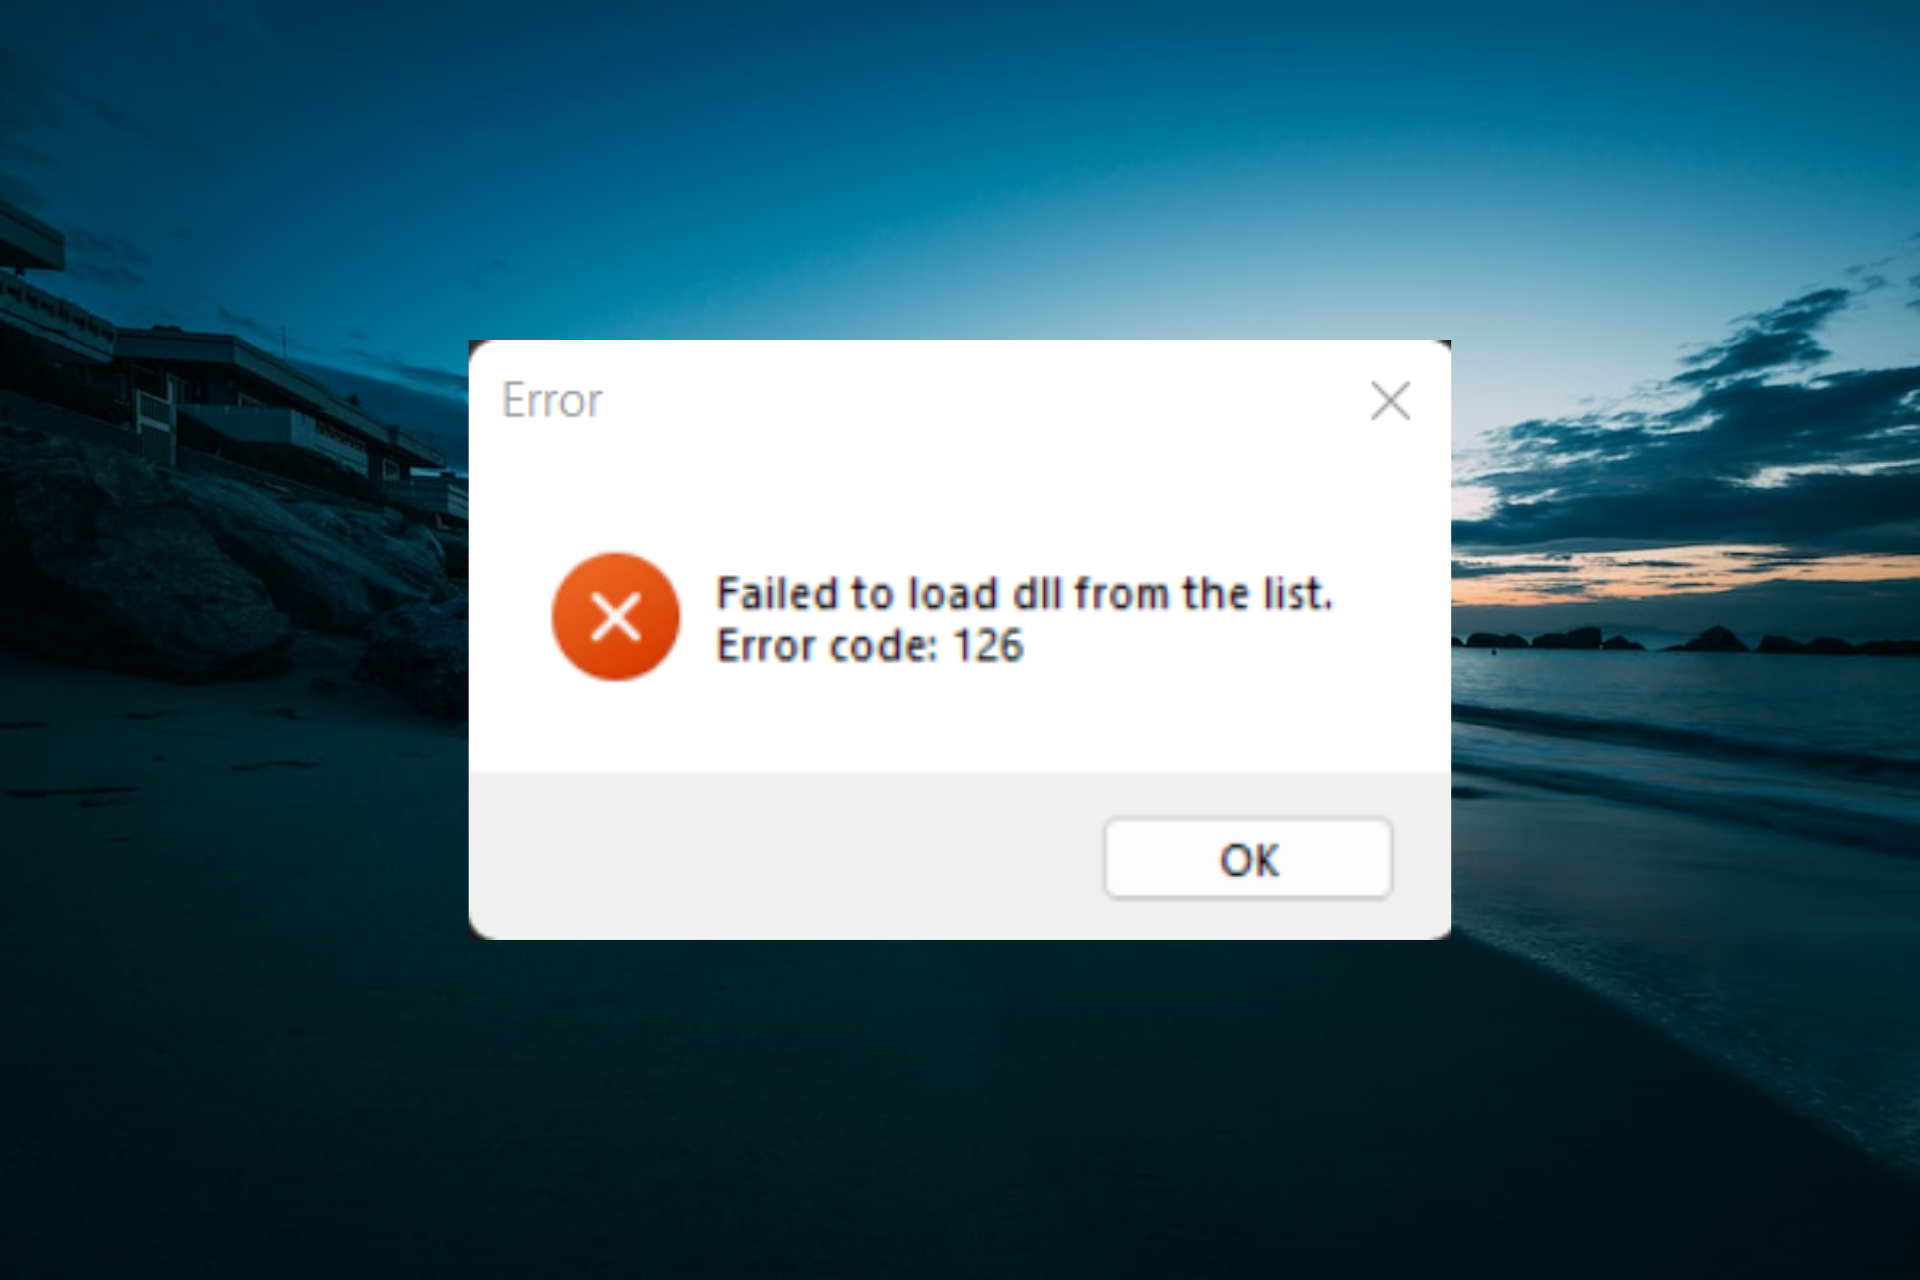 Could not load dll from list error code 126